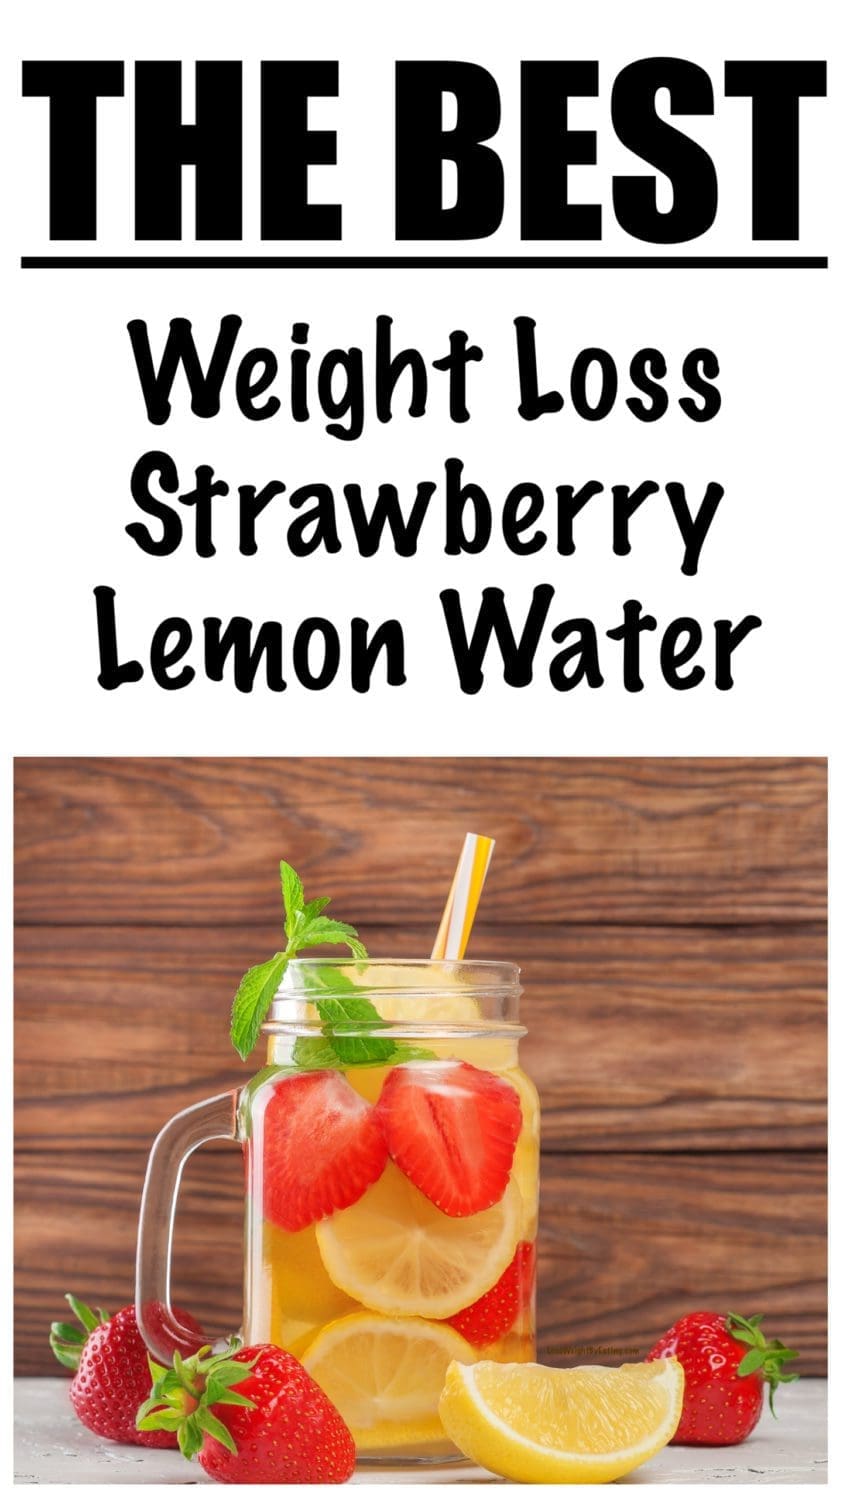 strawberry and lemon water recipes and benefits